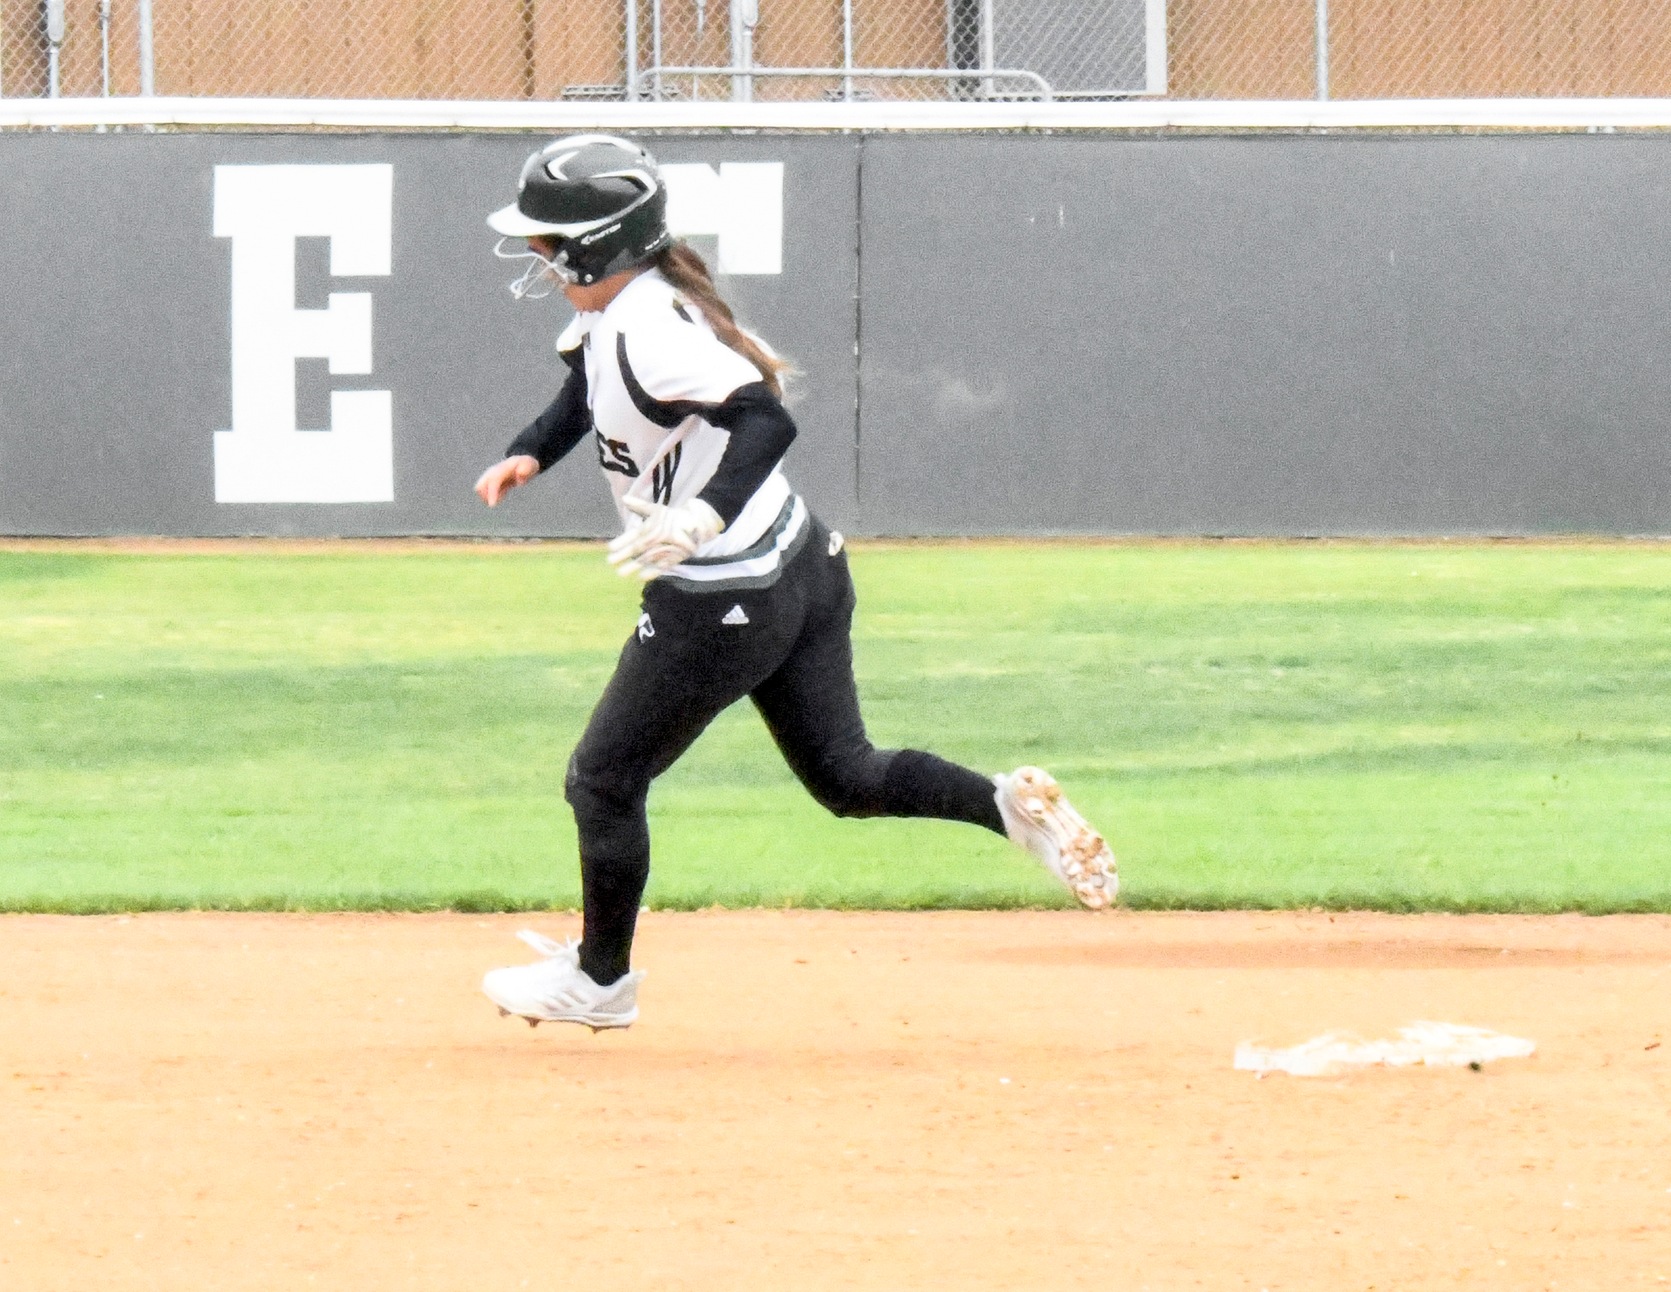 The East Los Angeles College softball team split four games in the Mt. San Jacinto Tournament including a 2-1 win over Santa Barbara City College and an 11-5 win over Grossmont College. Natalie Acosta, pictured, is rounding second base. (Photo by DeeDee Jackson)